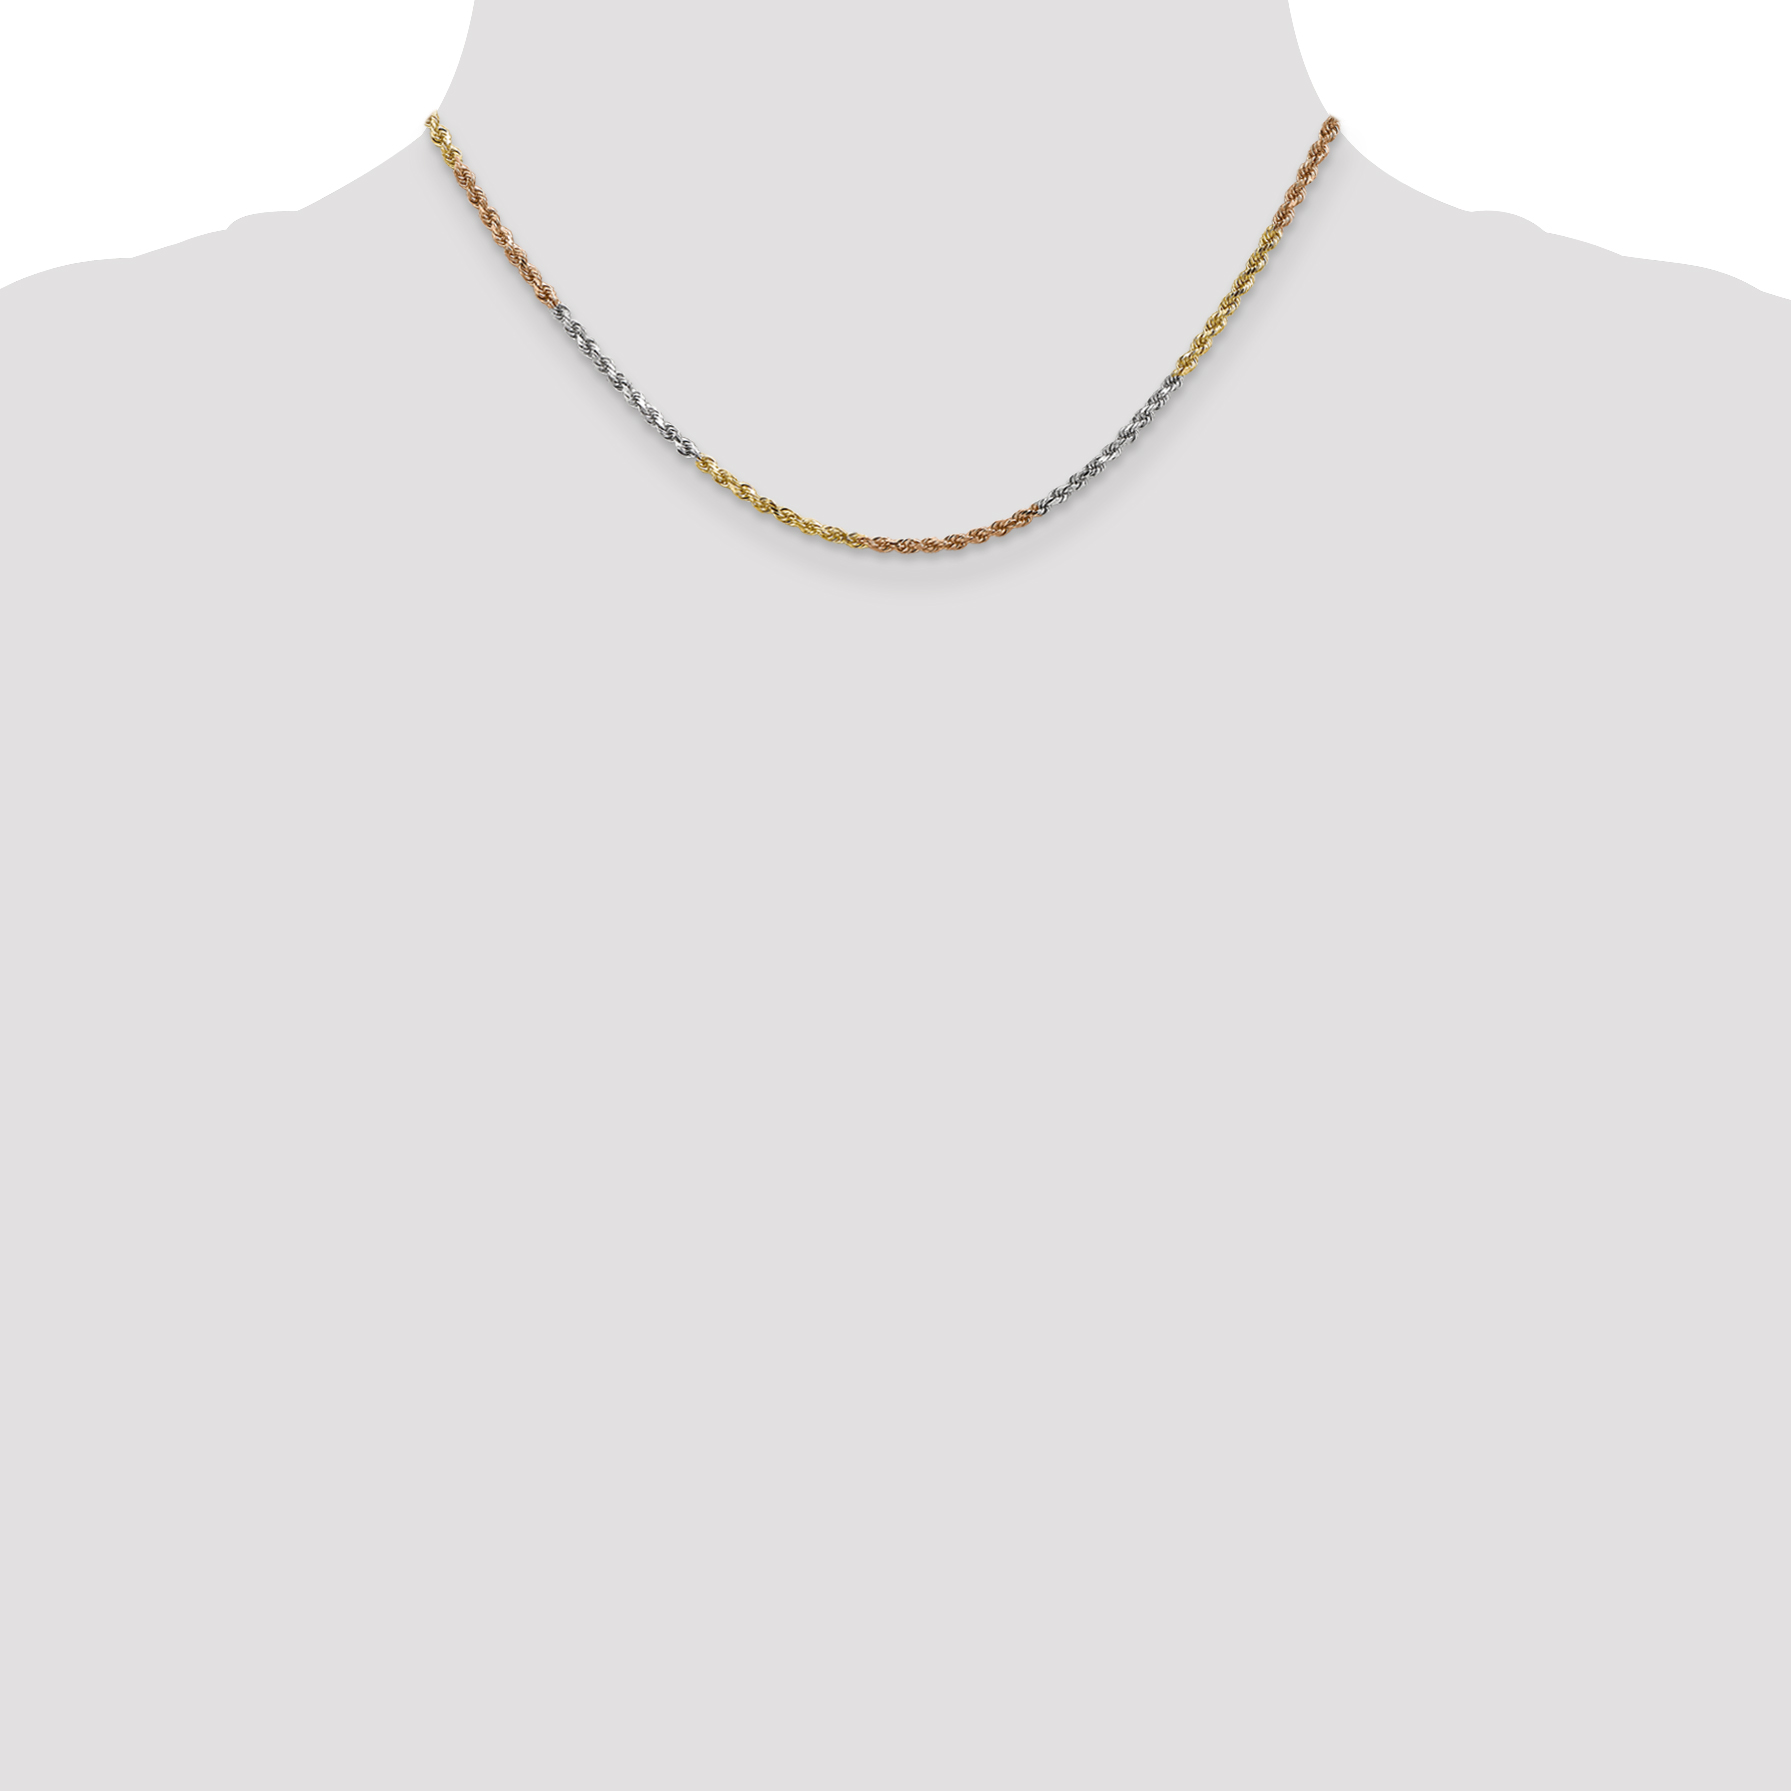 Hollow Rope Chain Necklace 14K Tri-Tone Gold 18